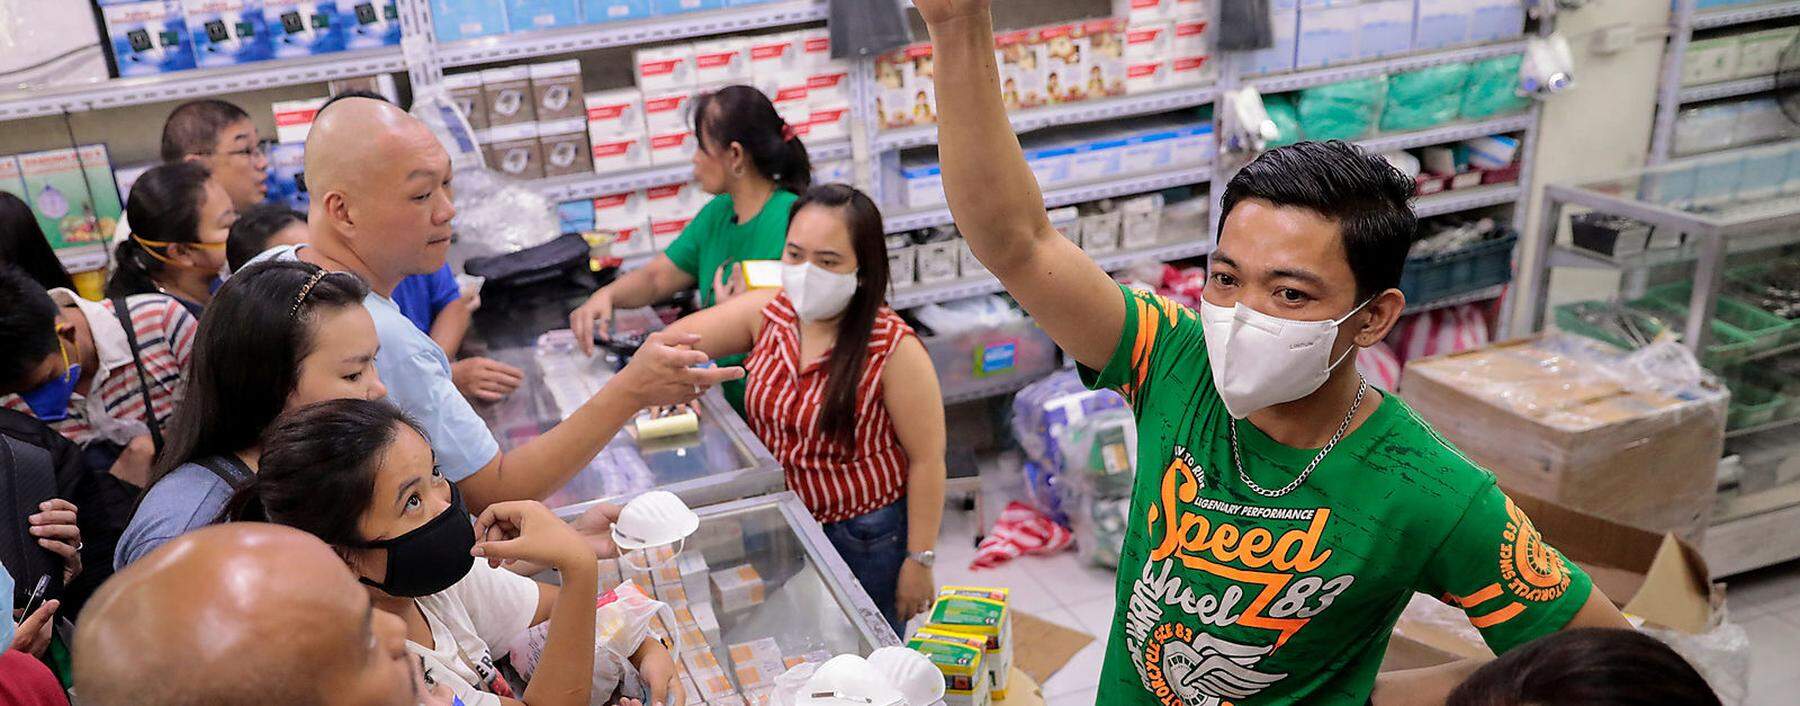 A vendor shows the only type of face mask they have available as people scramble to buy masks in a medical supply store a day after the Philippine government confirmed the first novel coronavirus case, in Manila